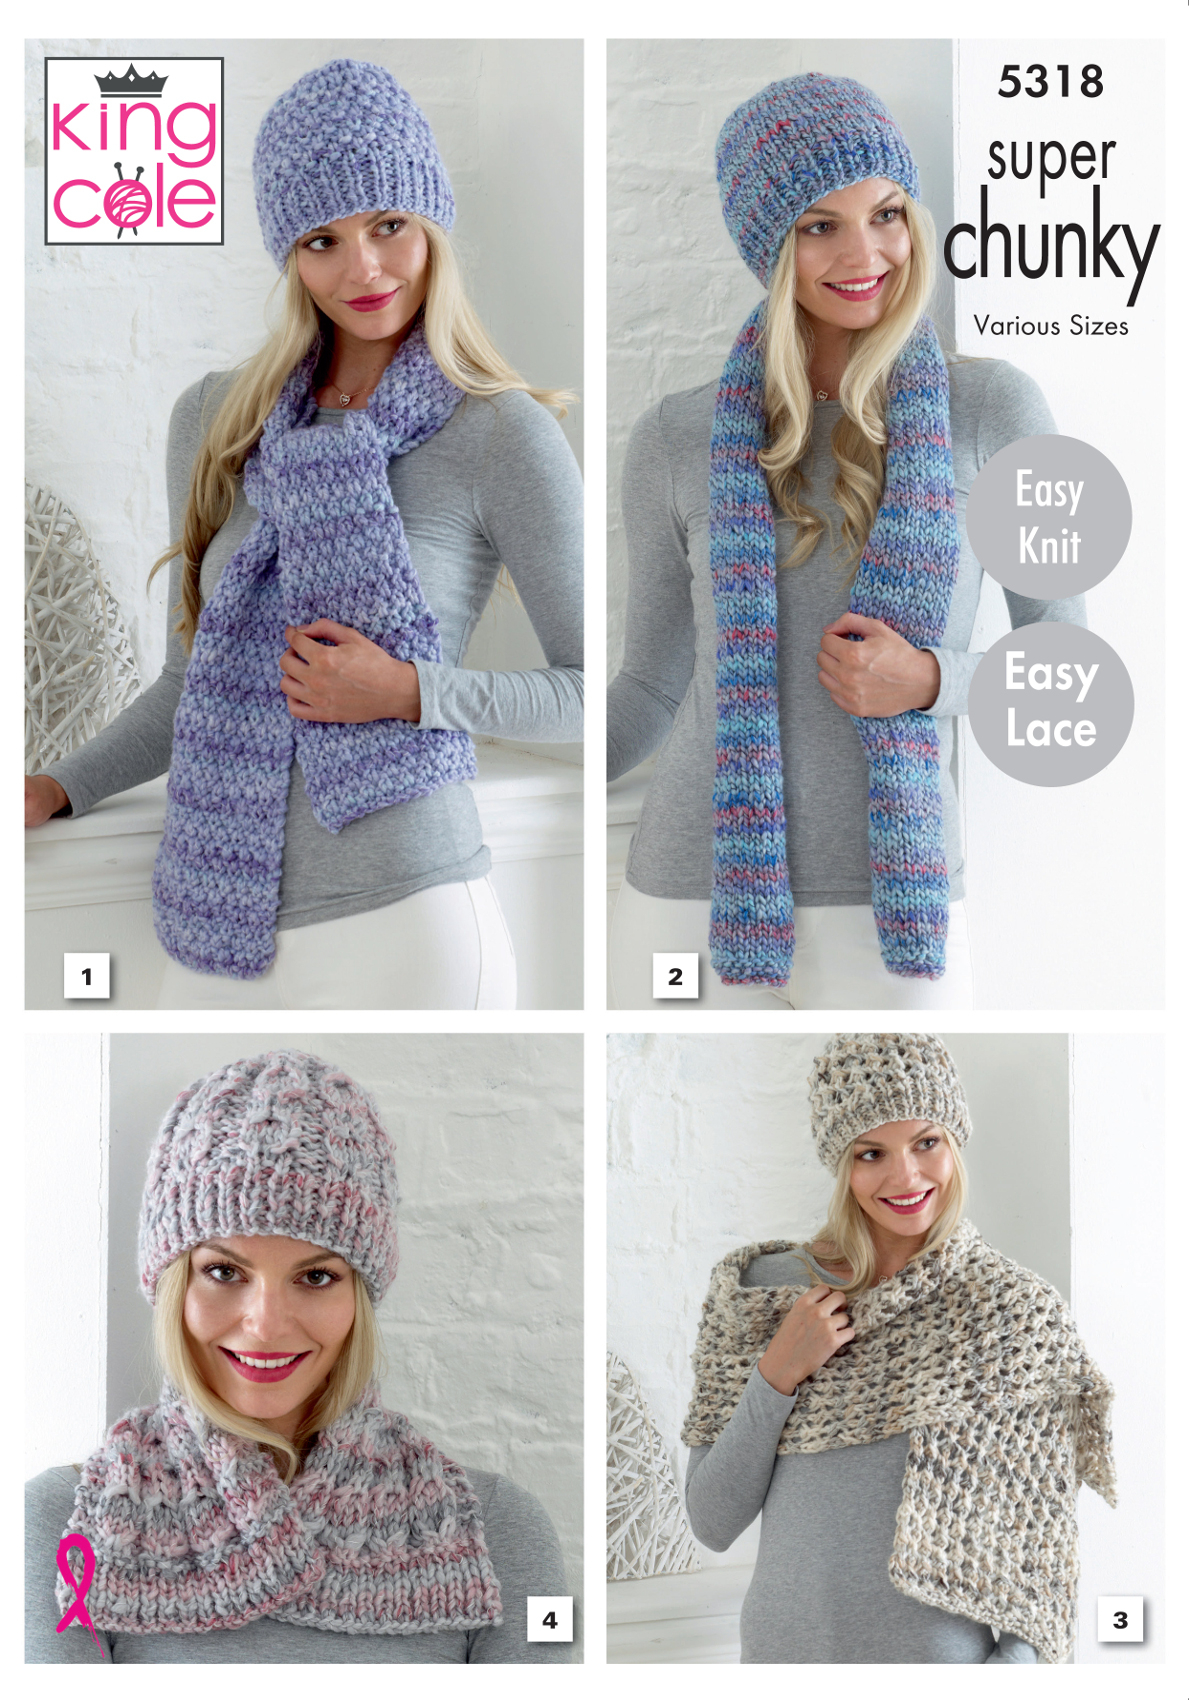 Ladies Scarf Knitting Pattern Details About Easy Knit Womens Knitting Pattern Scarves Hats King Cole Super Chunky 5318